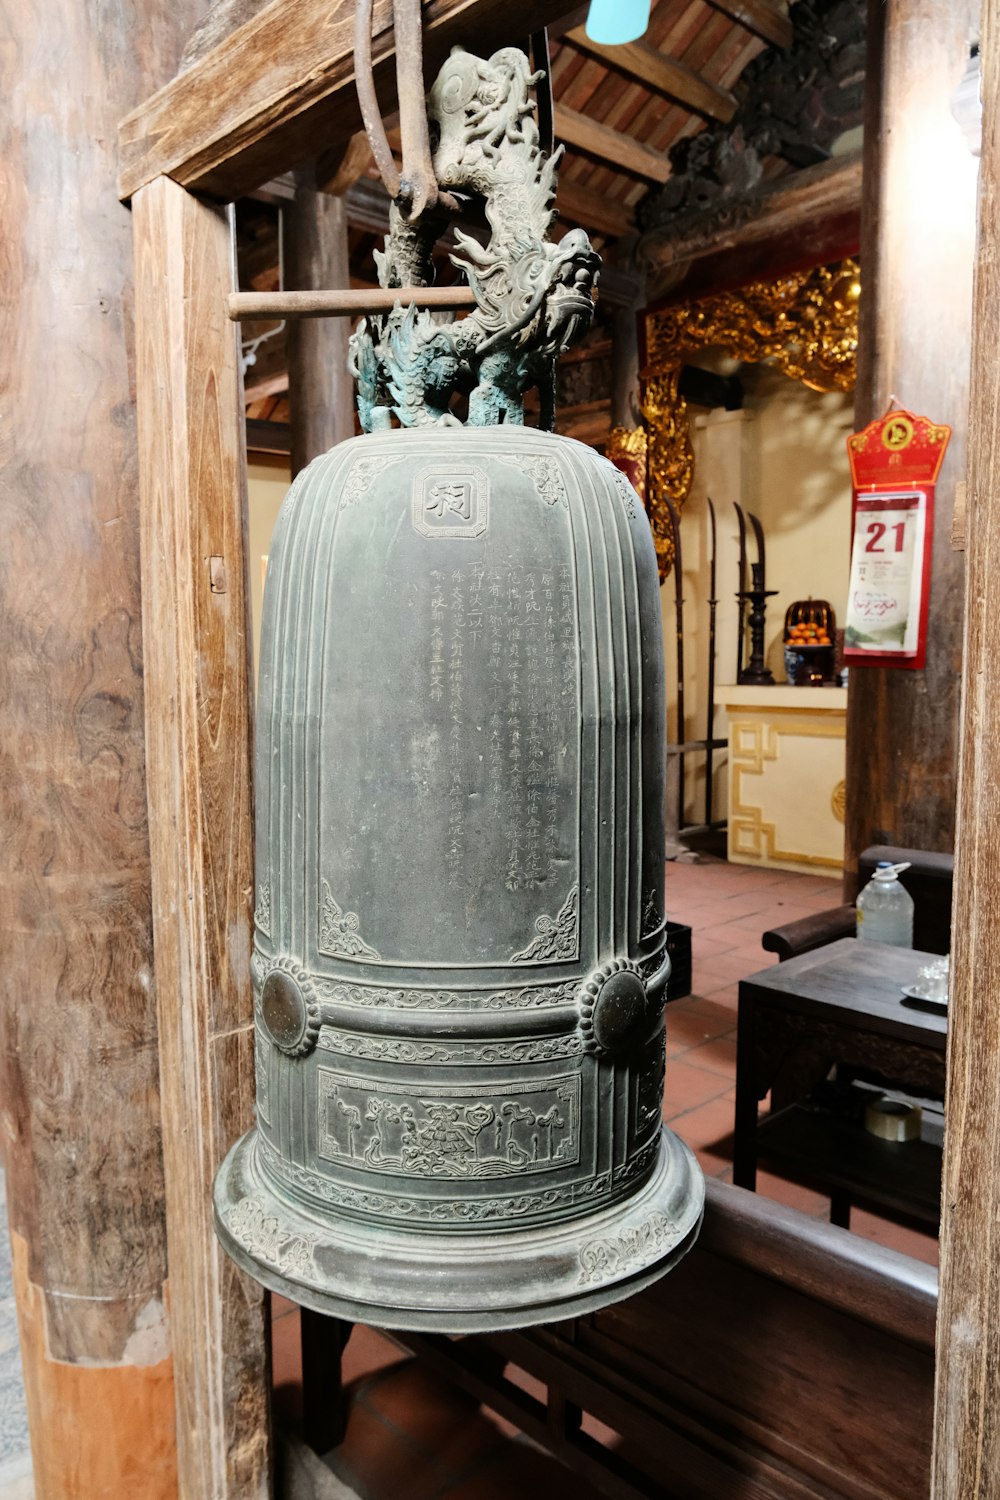 a bell with a statue on top of it